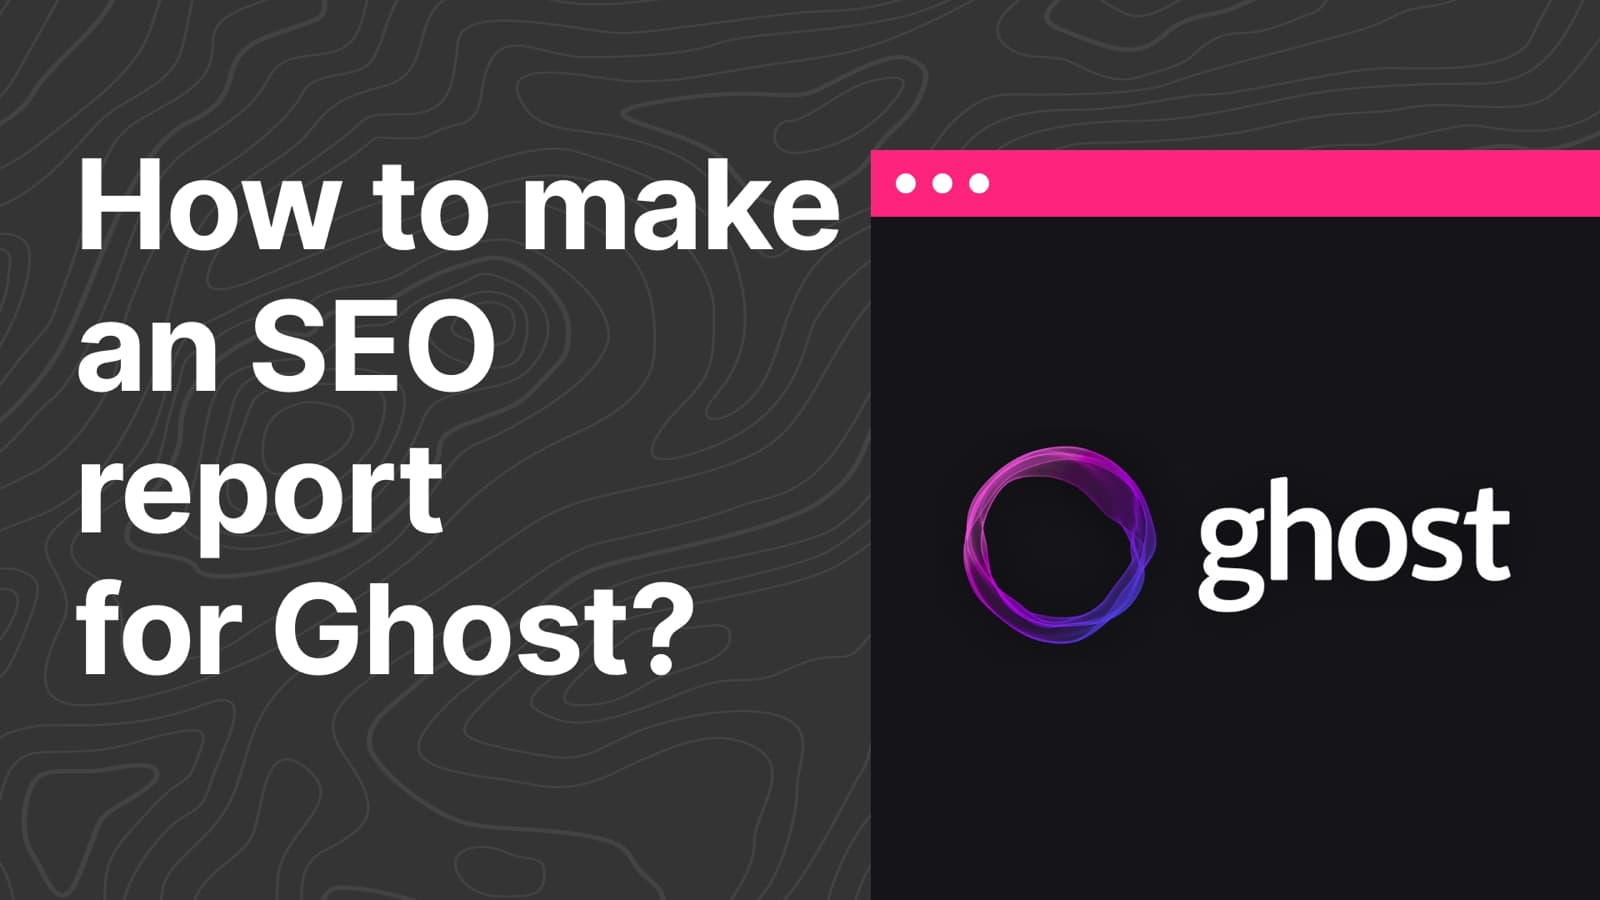 How to make an SEO report for Ghost?